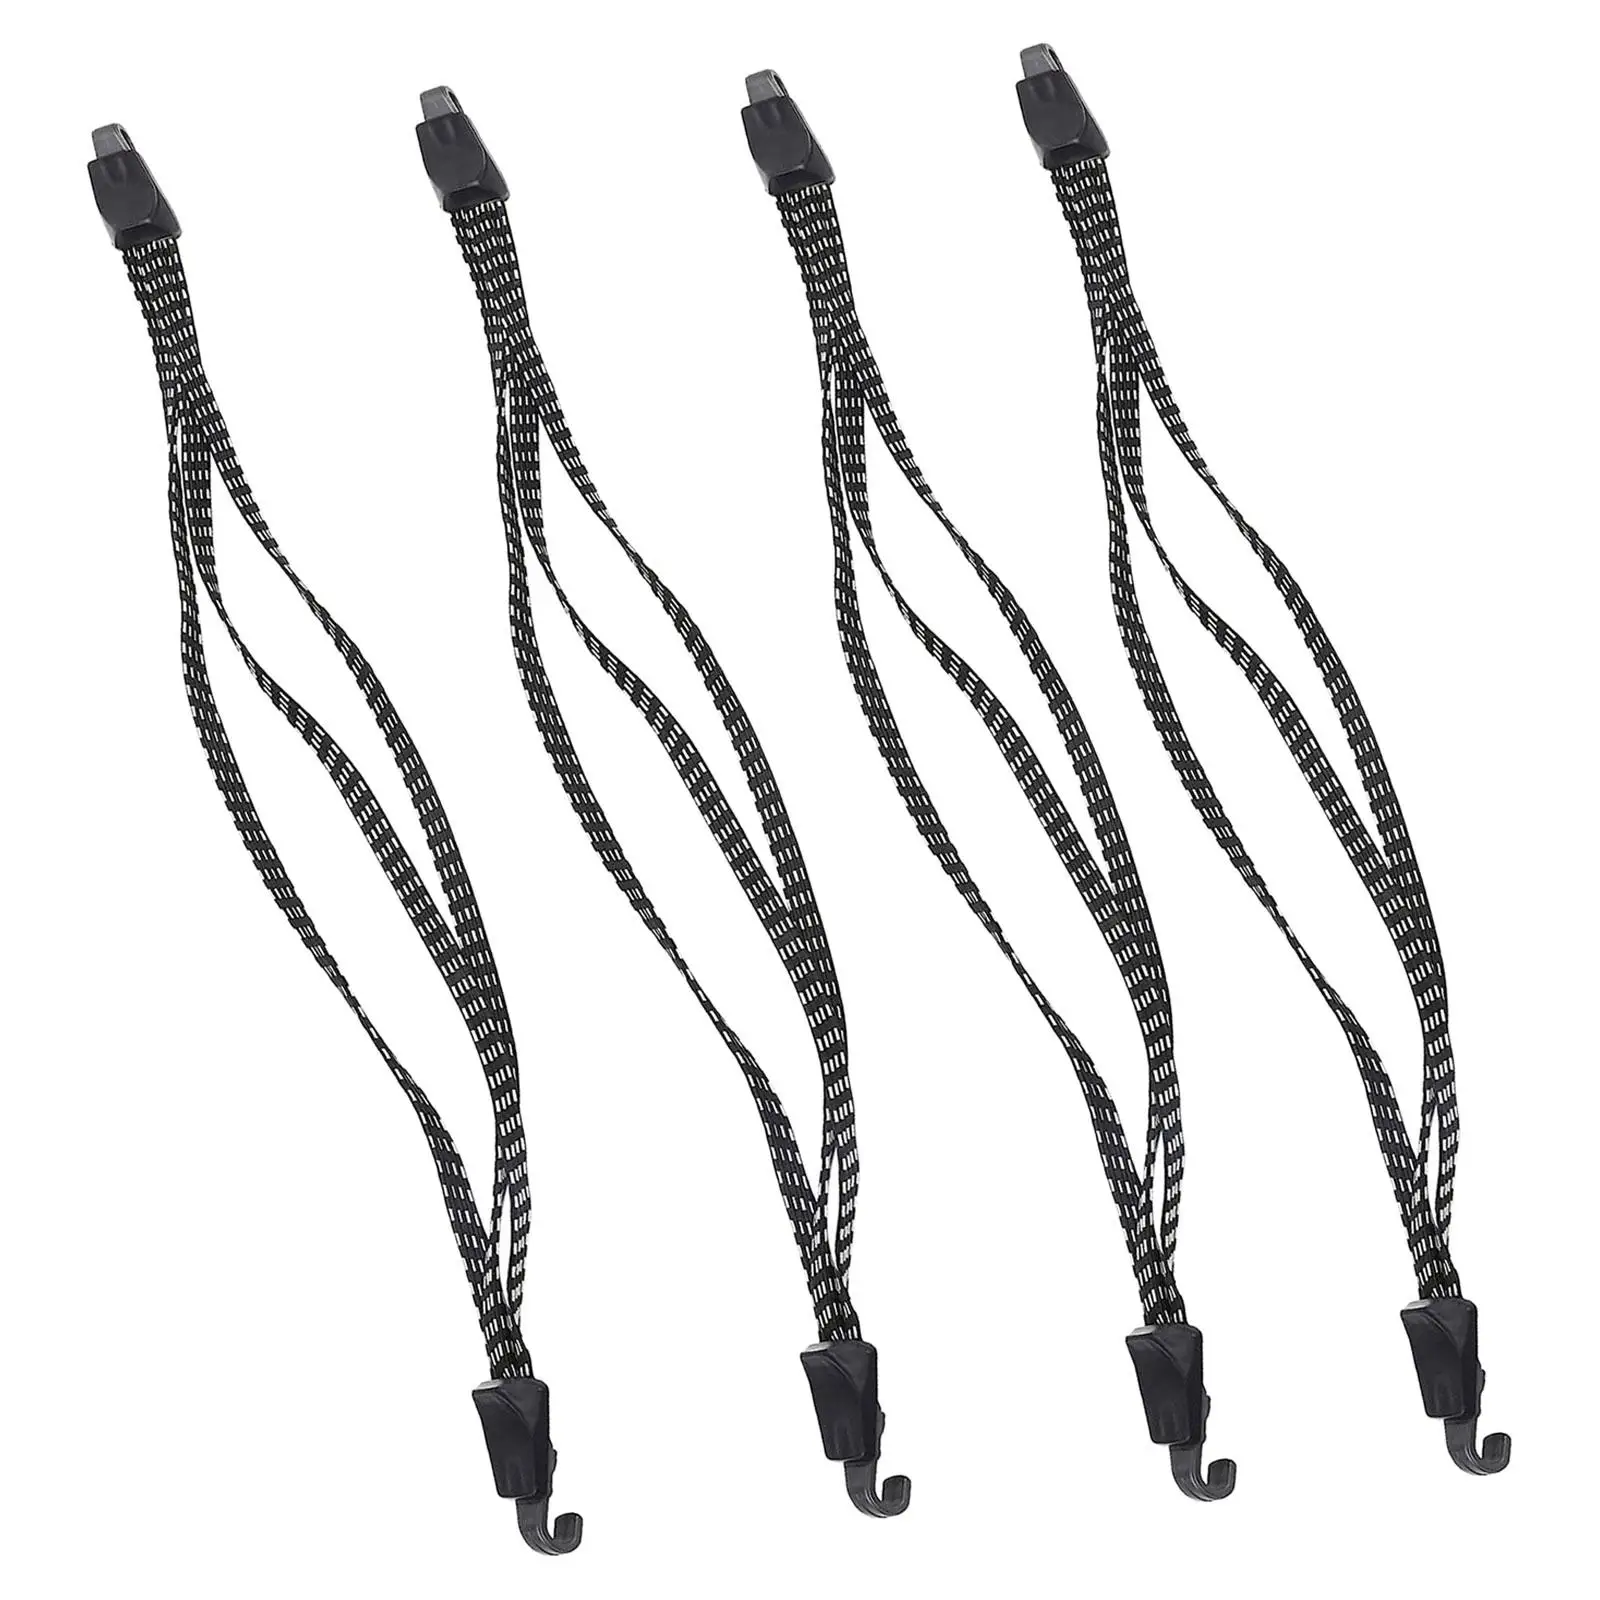 4 Pieces Motorcycle Luggage Rack Tie Down Straps Bungee Cords with Hooks Strong